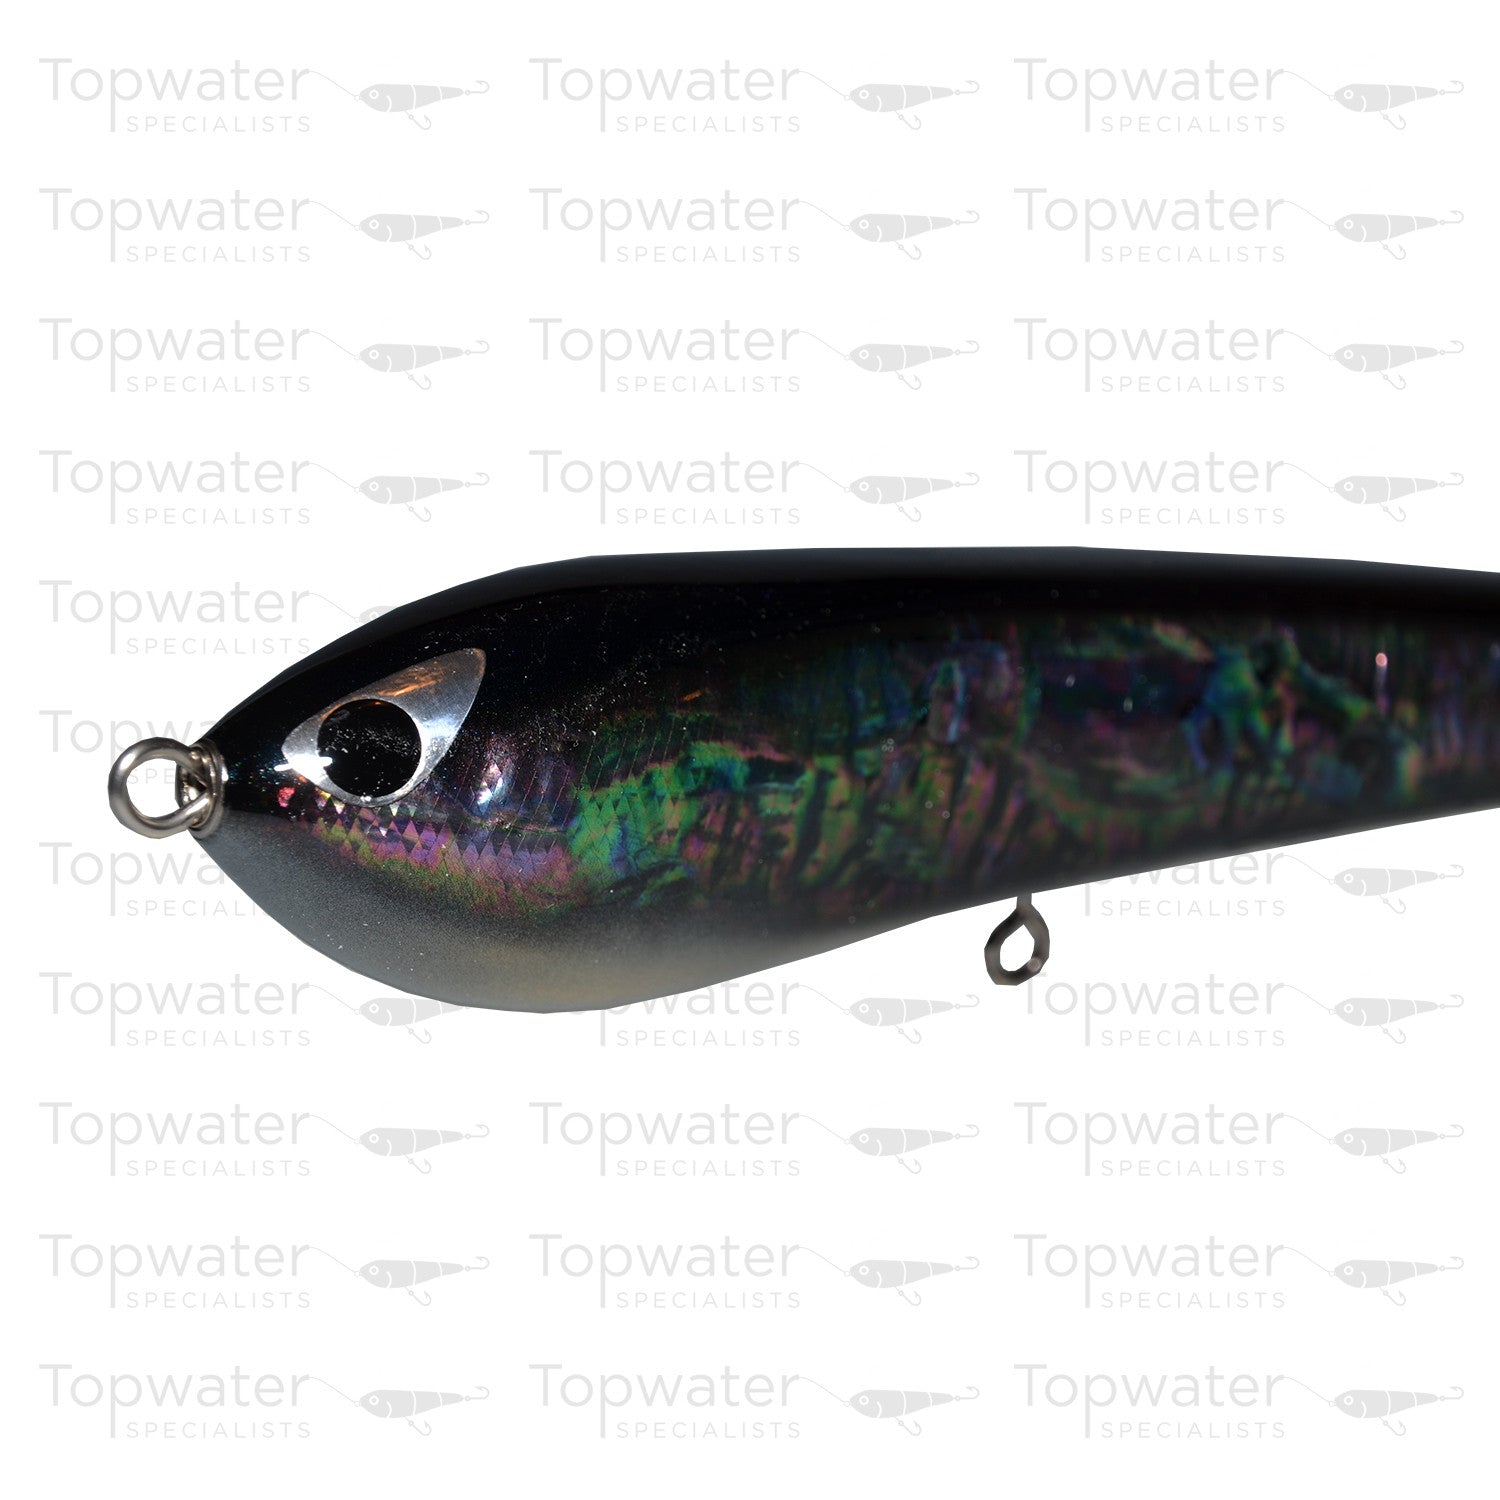 CB One Rodeo 220 Floating stick bait - Fish Head